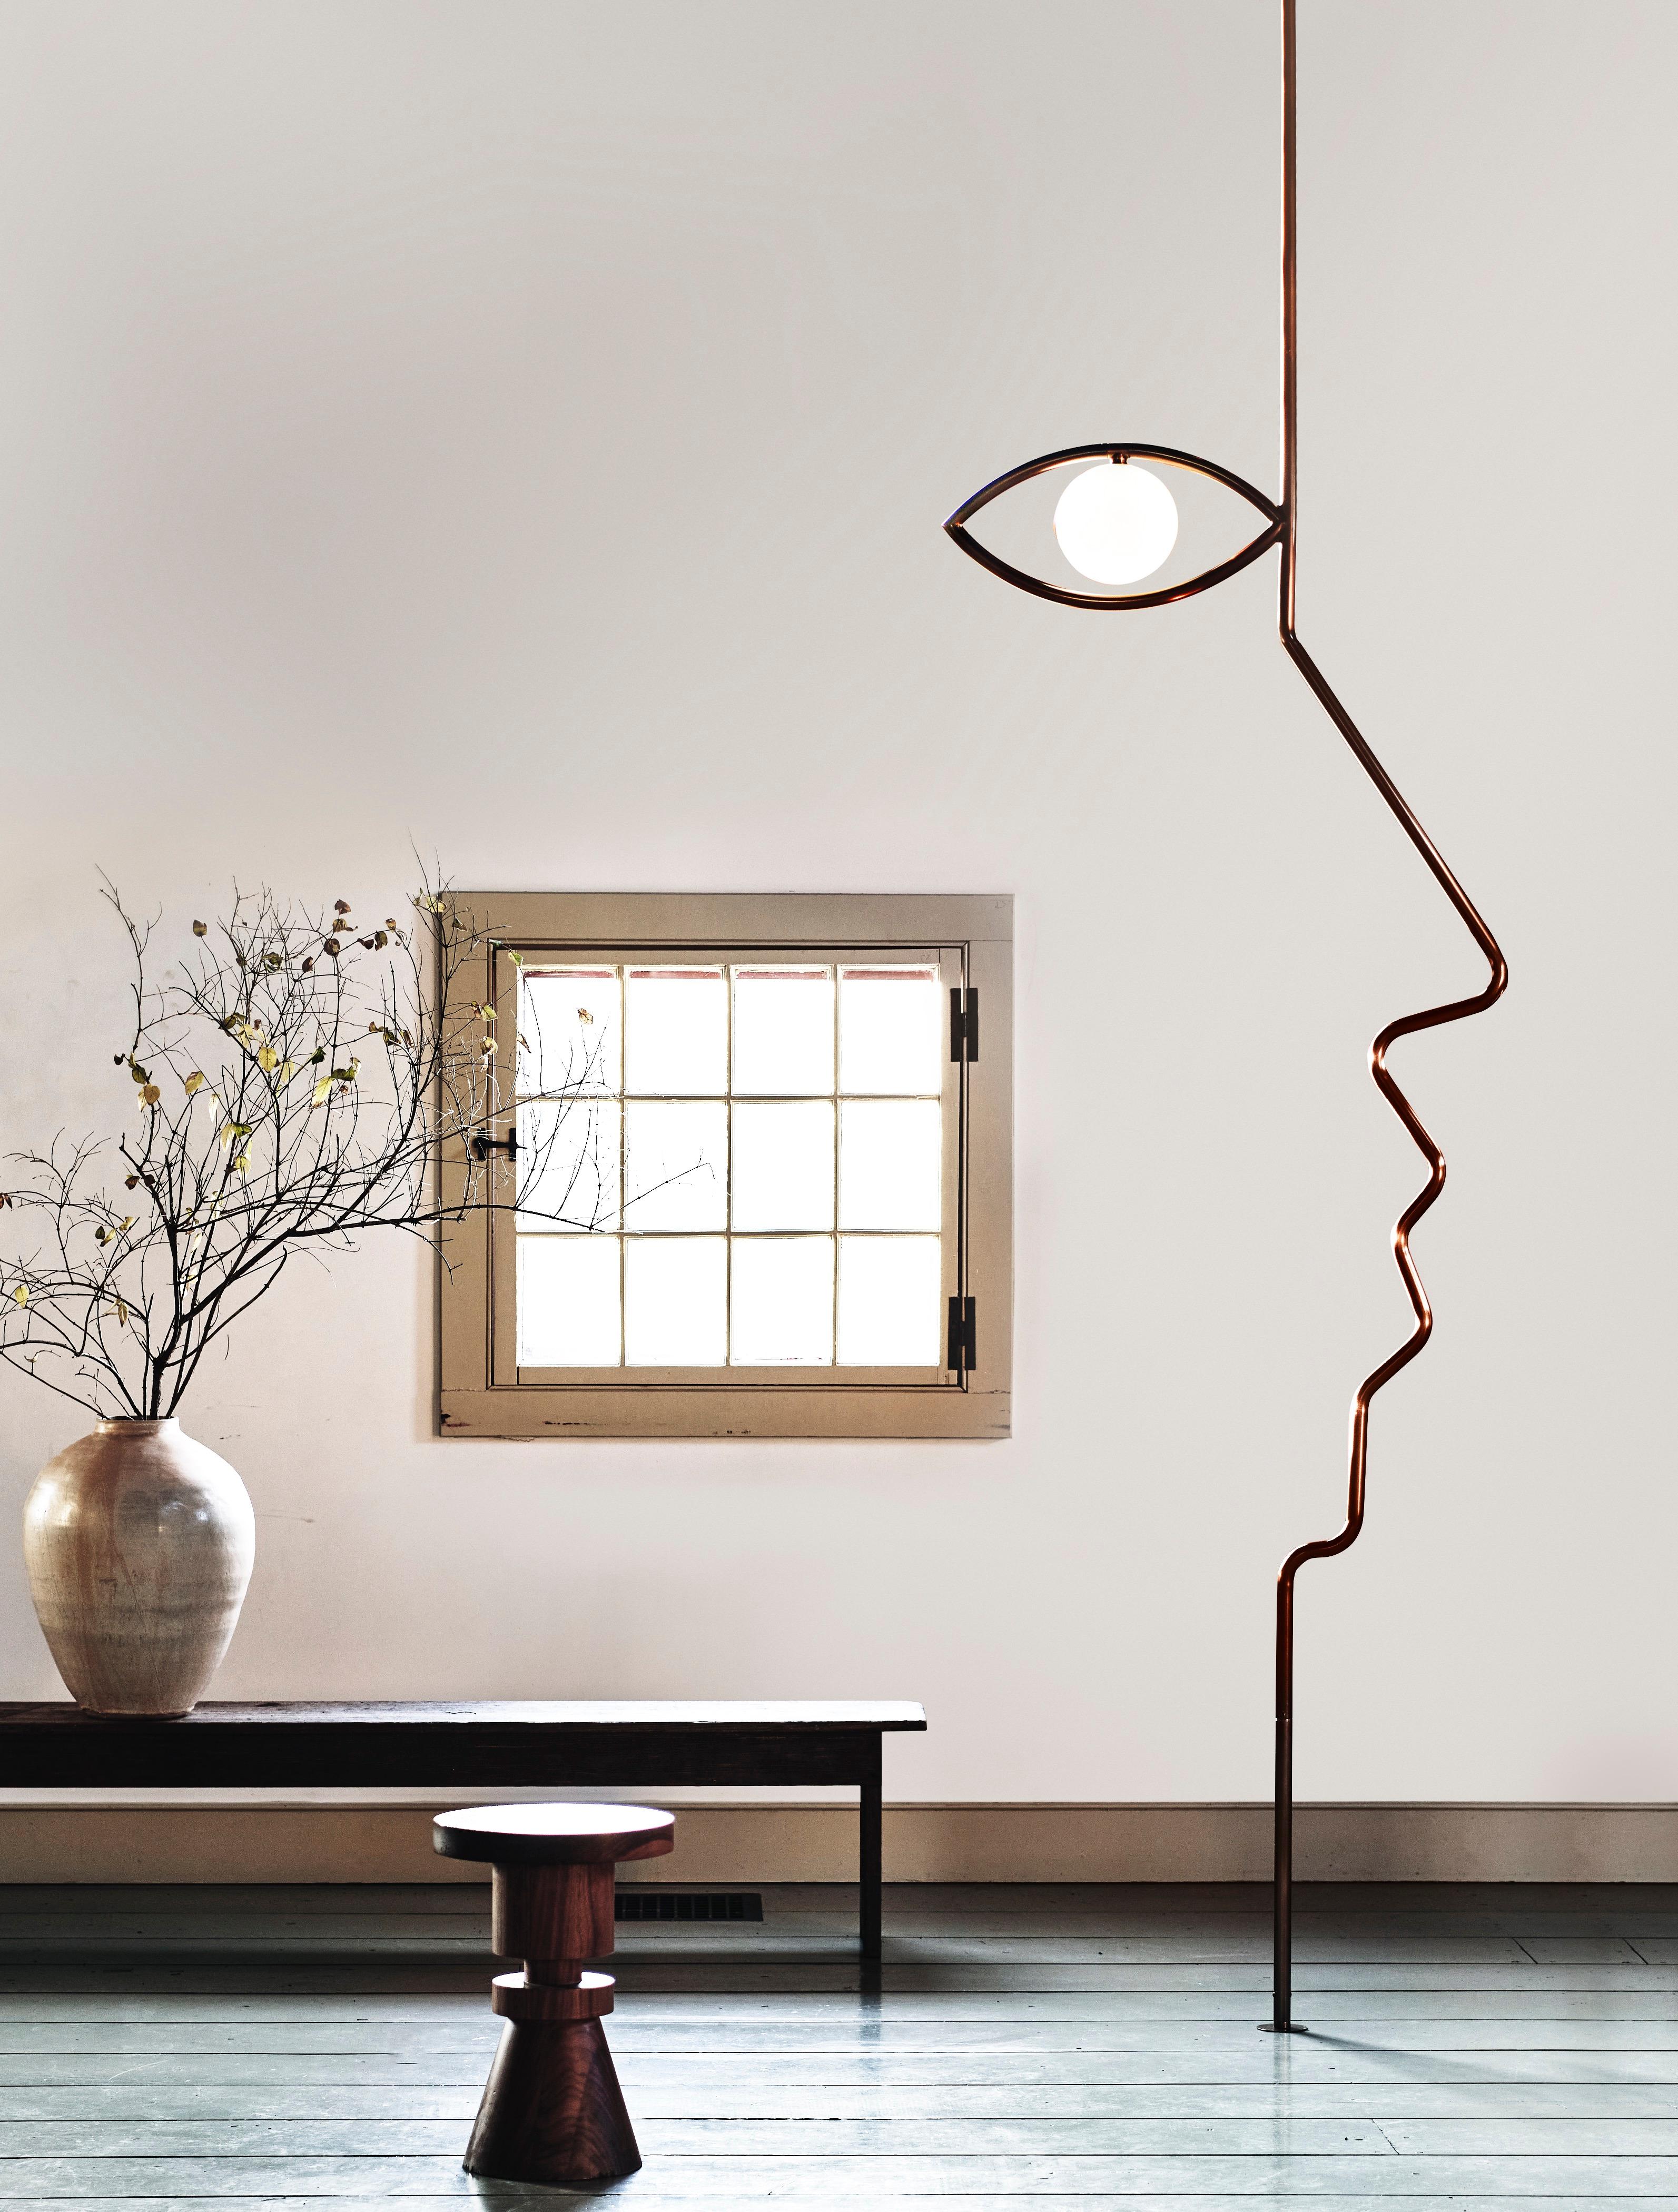 This floor-to-ceiling light sculpture traces the profile of a face in tubular steel, with a rich bronze patina. A soft glow from within the eye gives the piece life.

Materials: Brass / Glass / Steel / Aluminum

Dimensions: W – 33 5/8″, H – 81 1/8″,